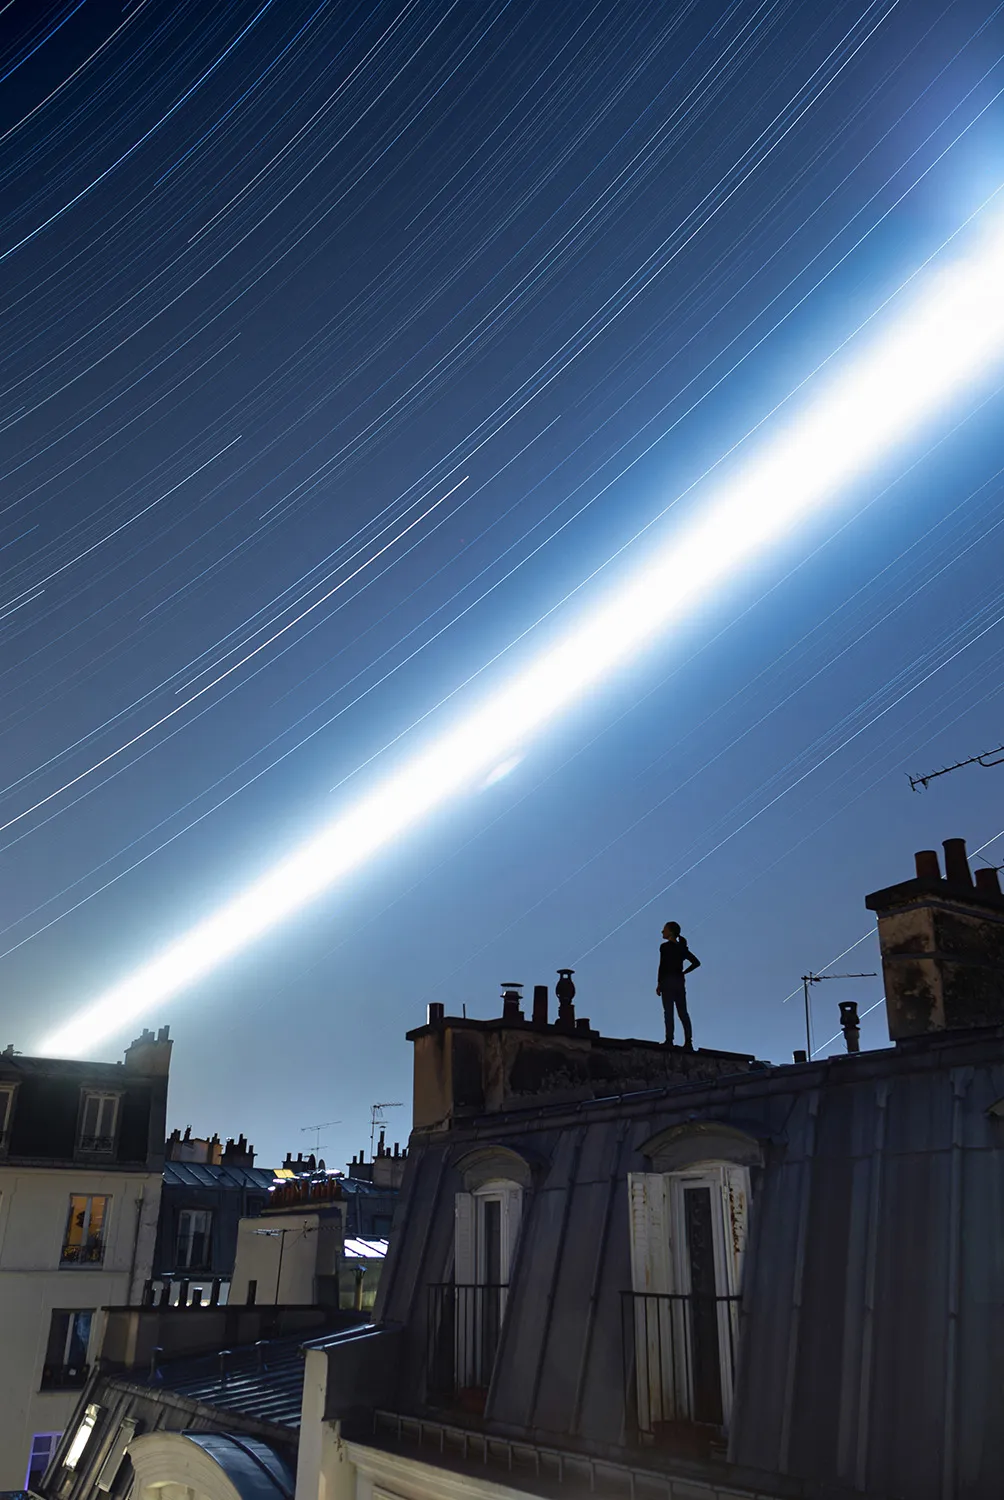 Path of the Full Moon above the Sleeping City © Rémi Leblanc-Messager (France), Paris, Île-de-France, France, 27 February 2021. Equipment: Canon EOS 6D camera, 28 mm f/6.3 lens, ISO 200, 1,080 x 15-second exposures